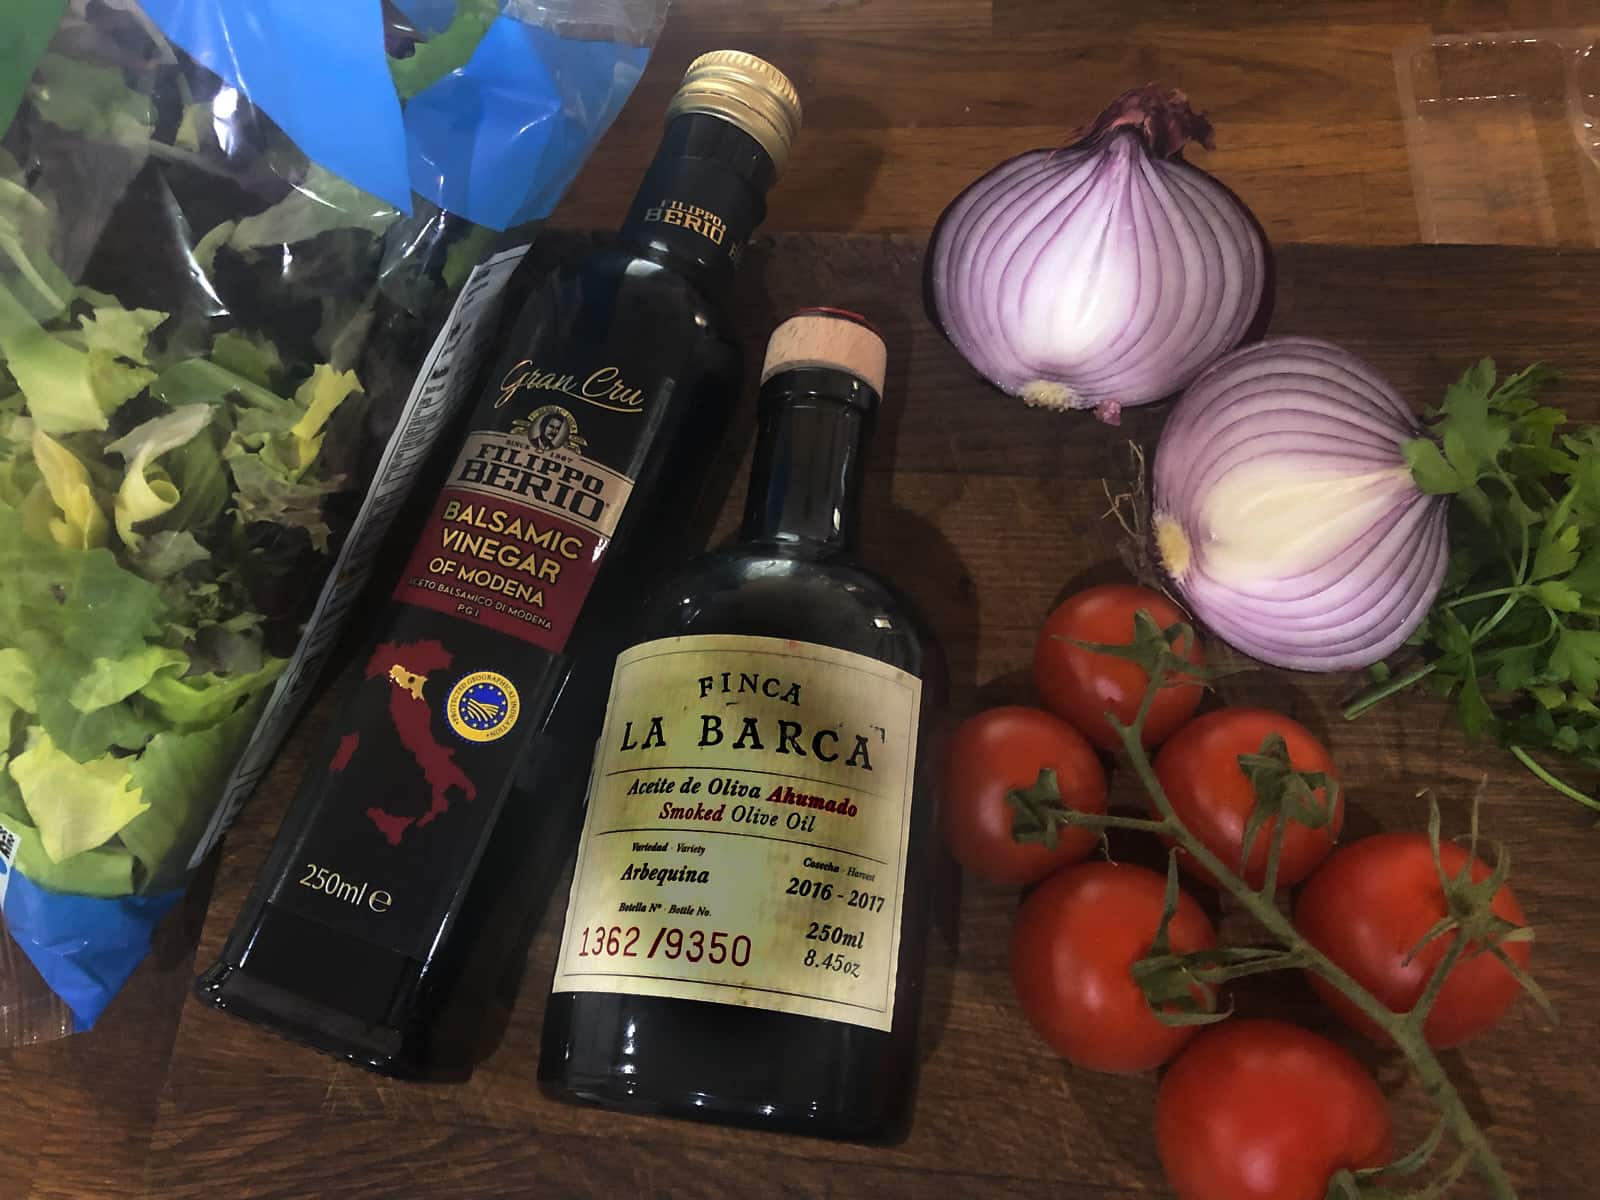 Ingredients to make a simple salad with balsamic dressing.